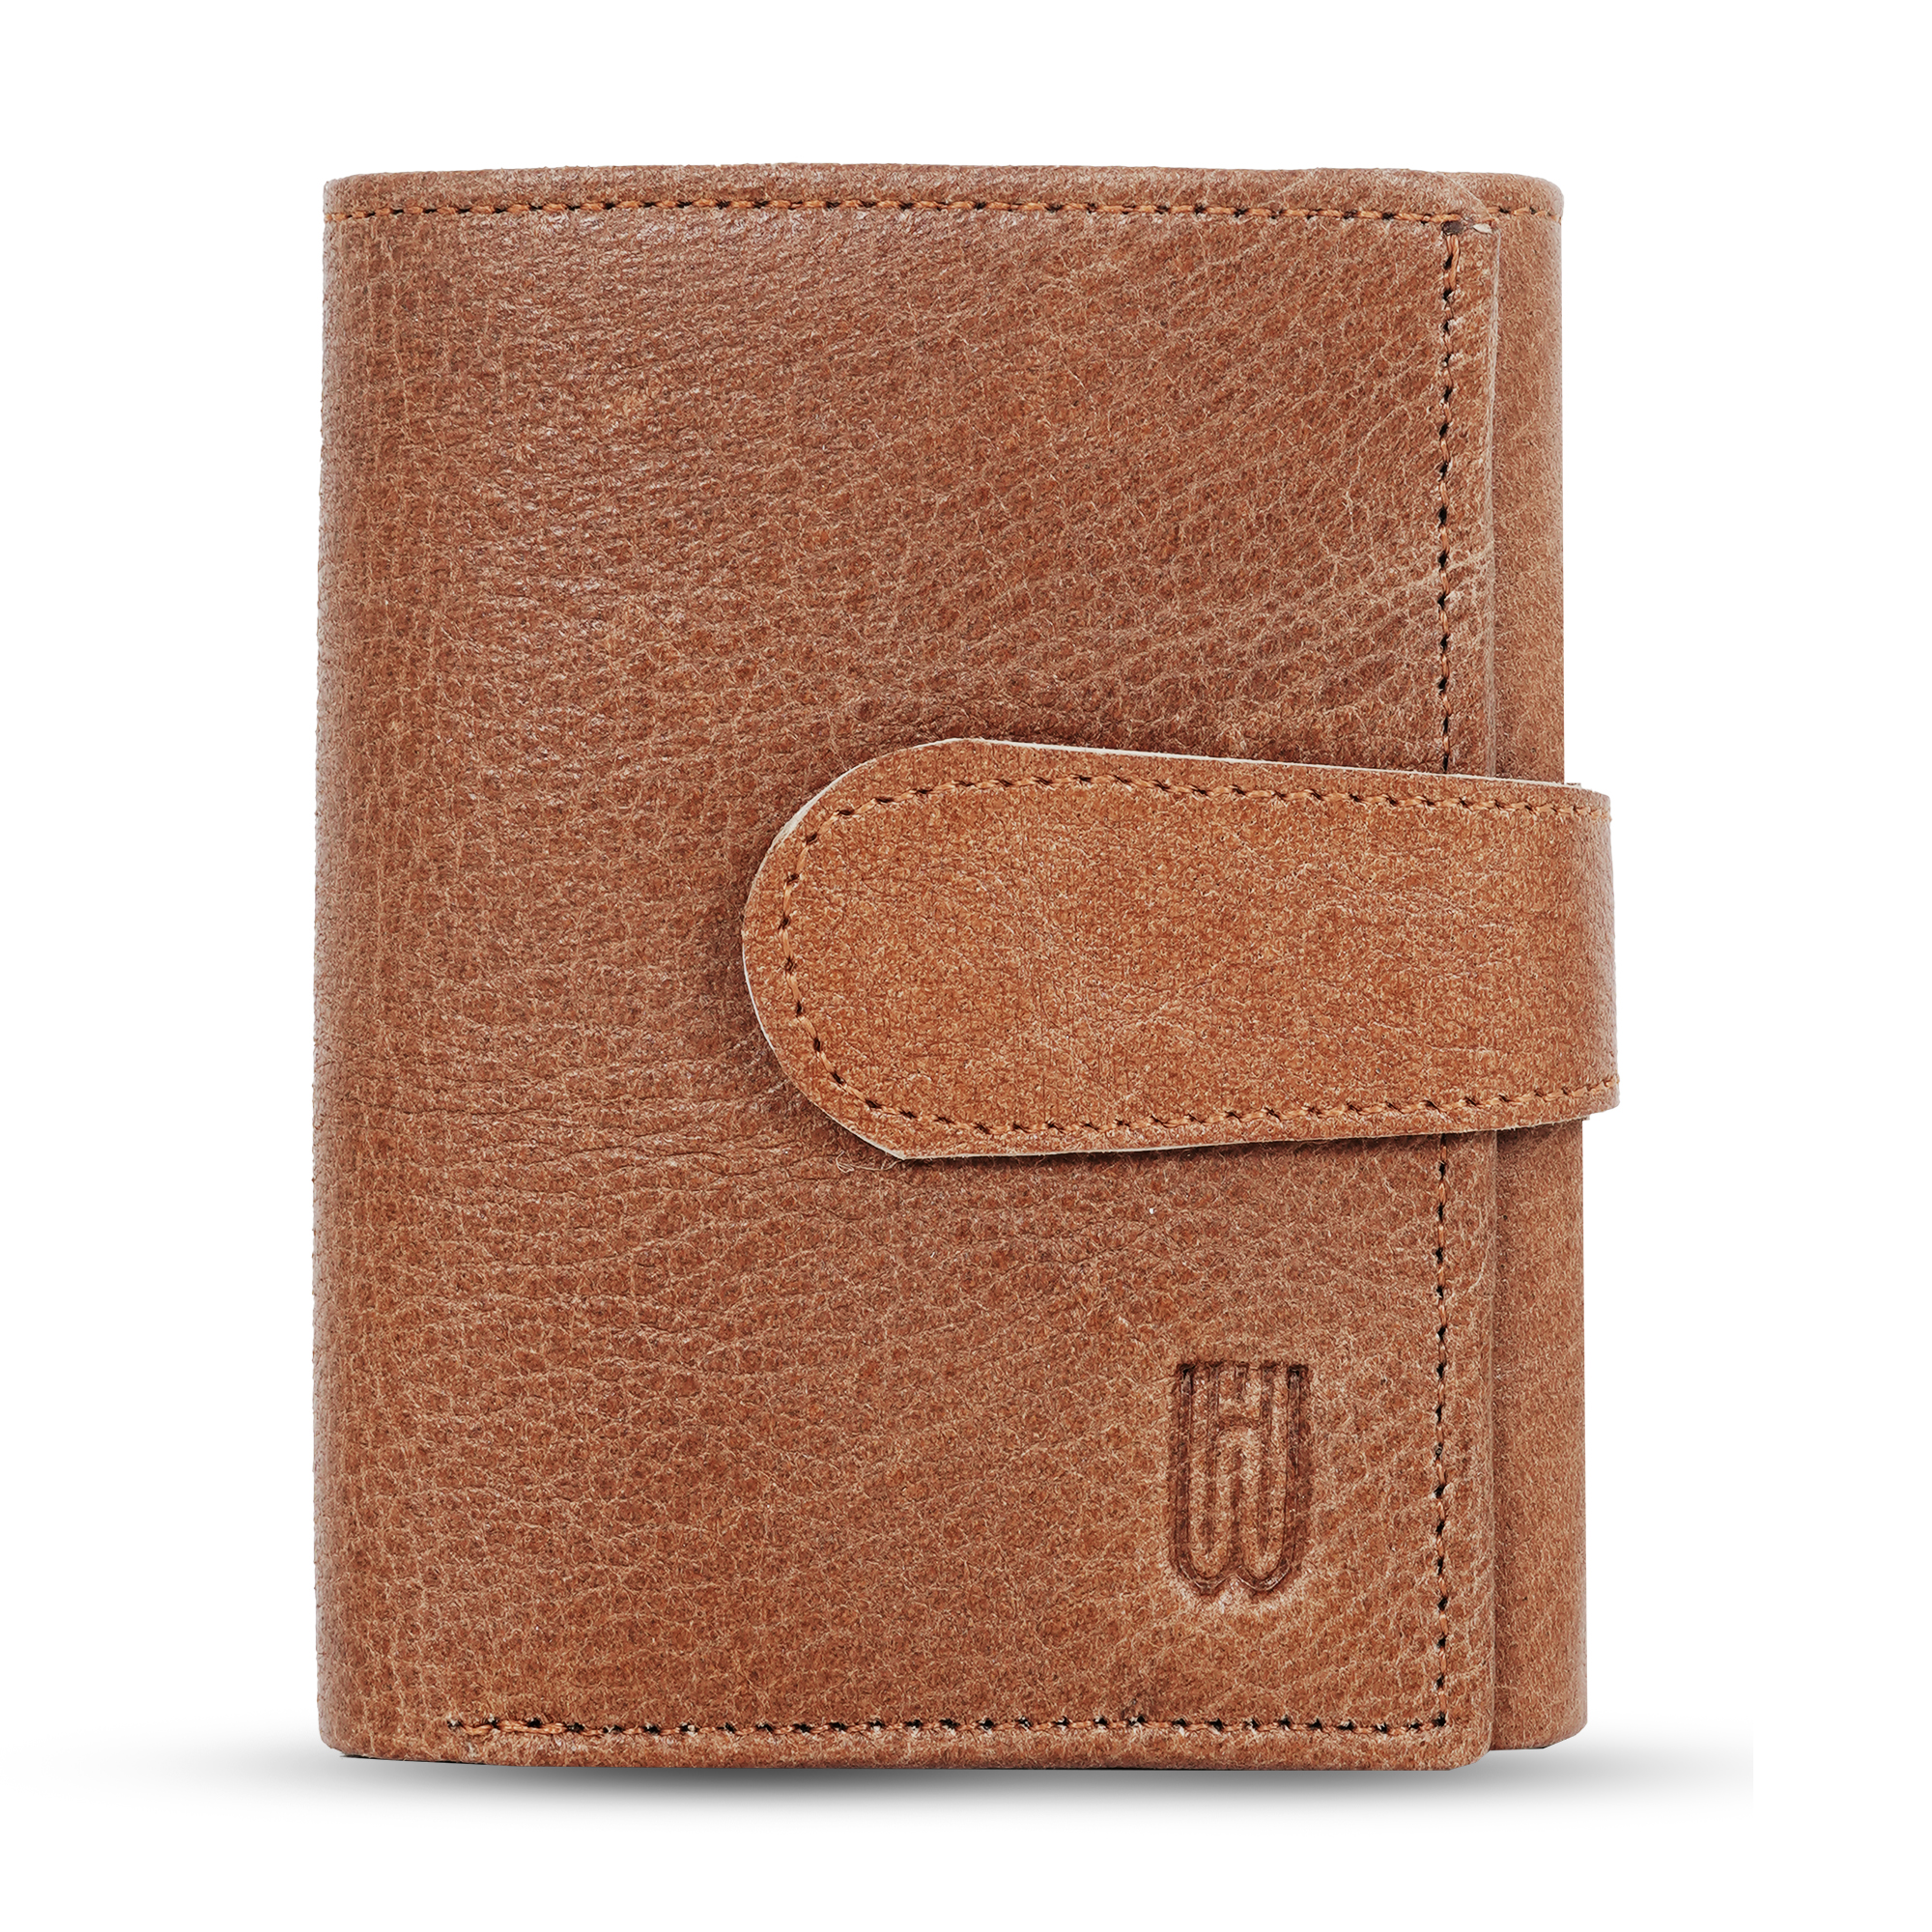 Genuine leather 3 fold wallet with 7 card slots ( TAN)